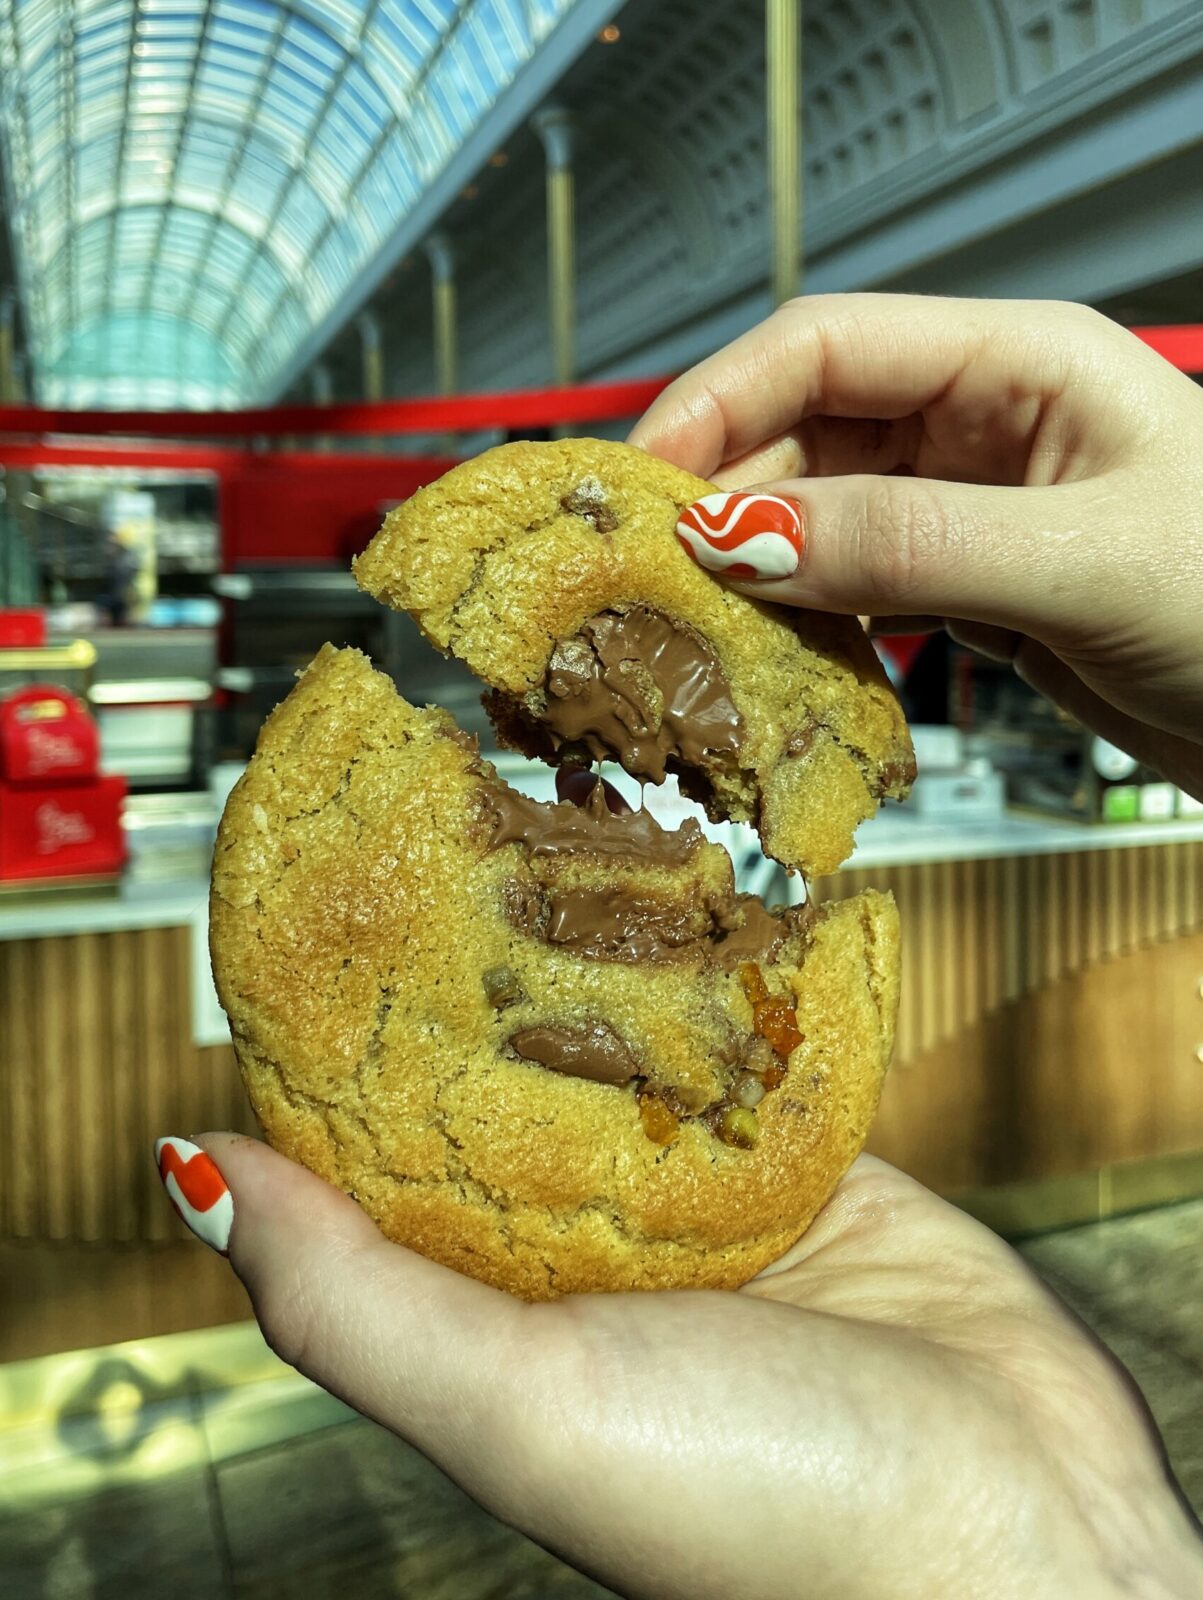 Ben's Cookies has opened at the Trafford Centre in Greater Manchester